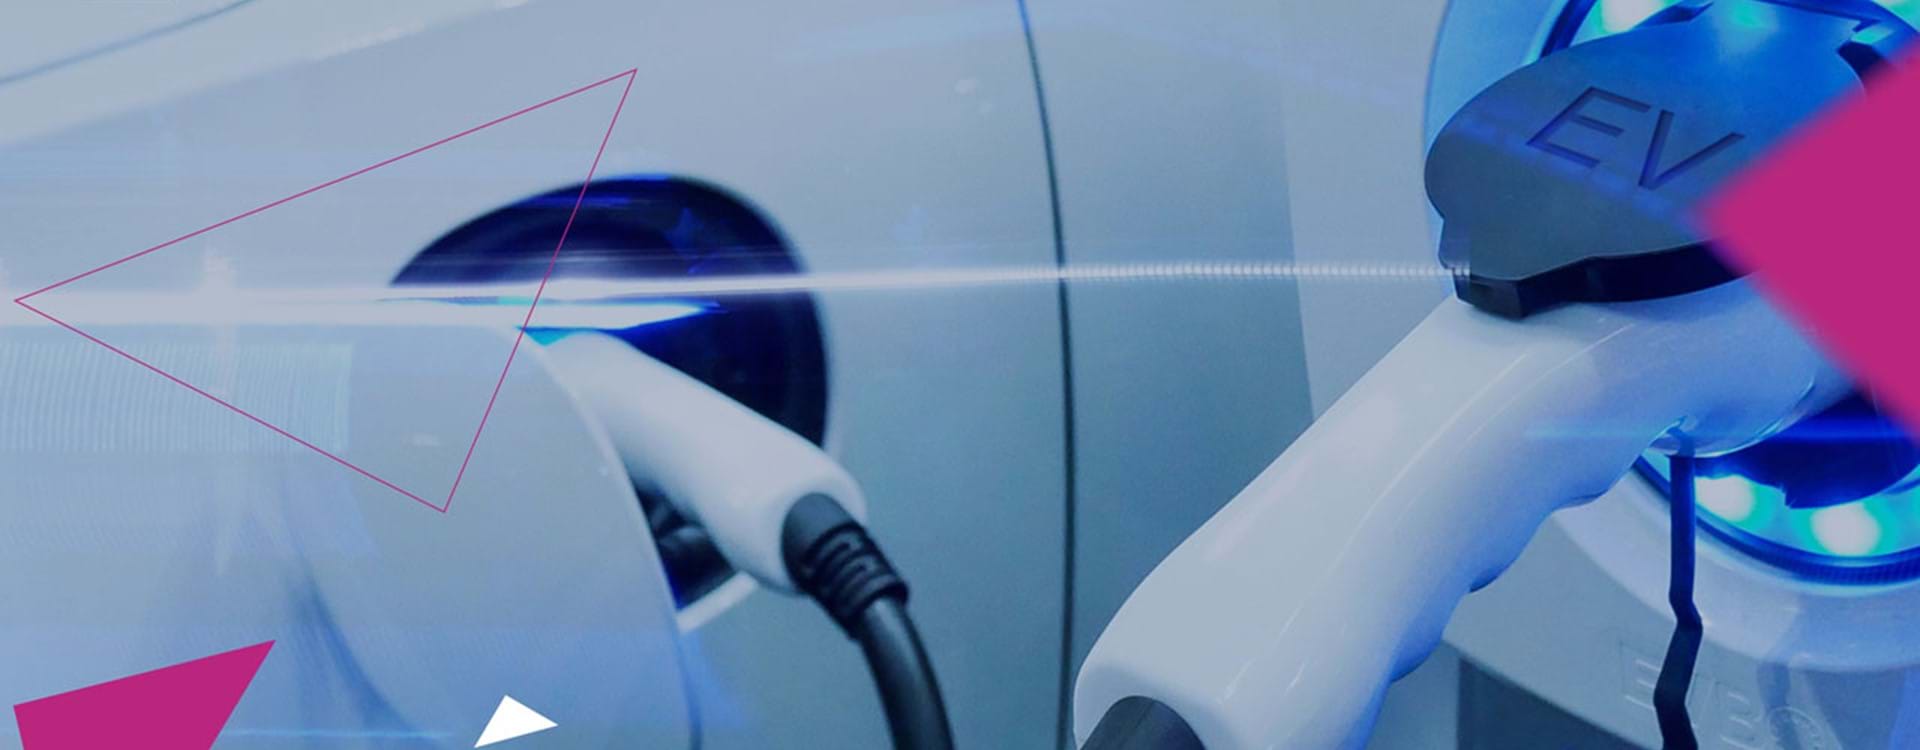 Have we reached a tipping point for electric vehicles?